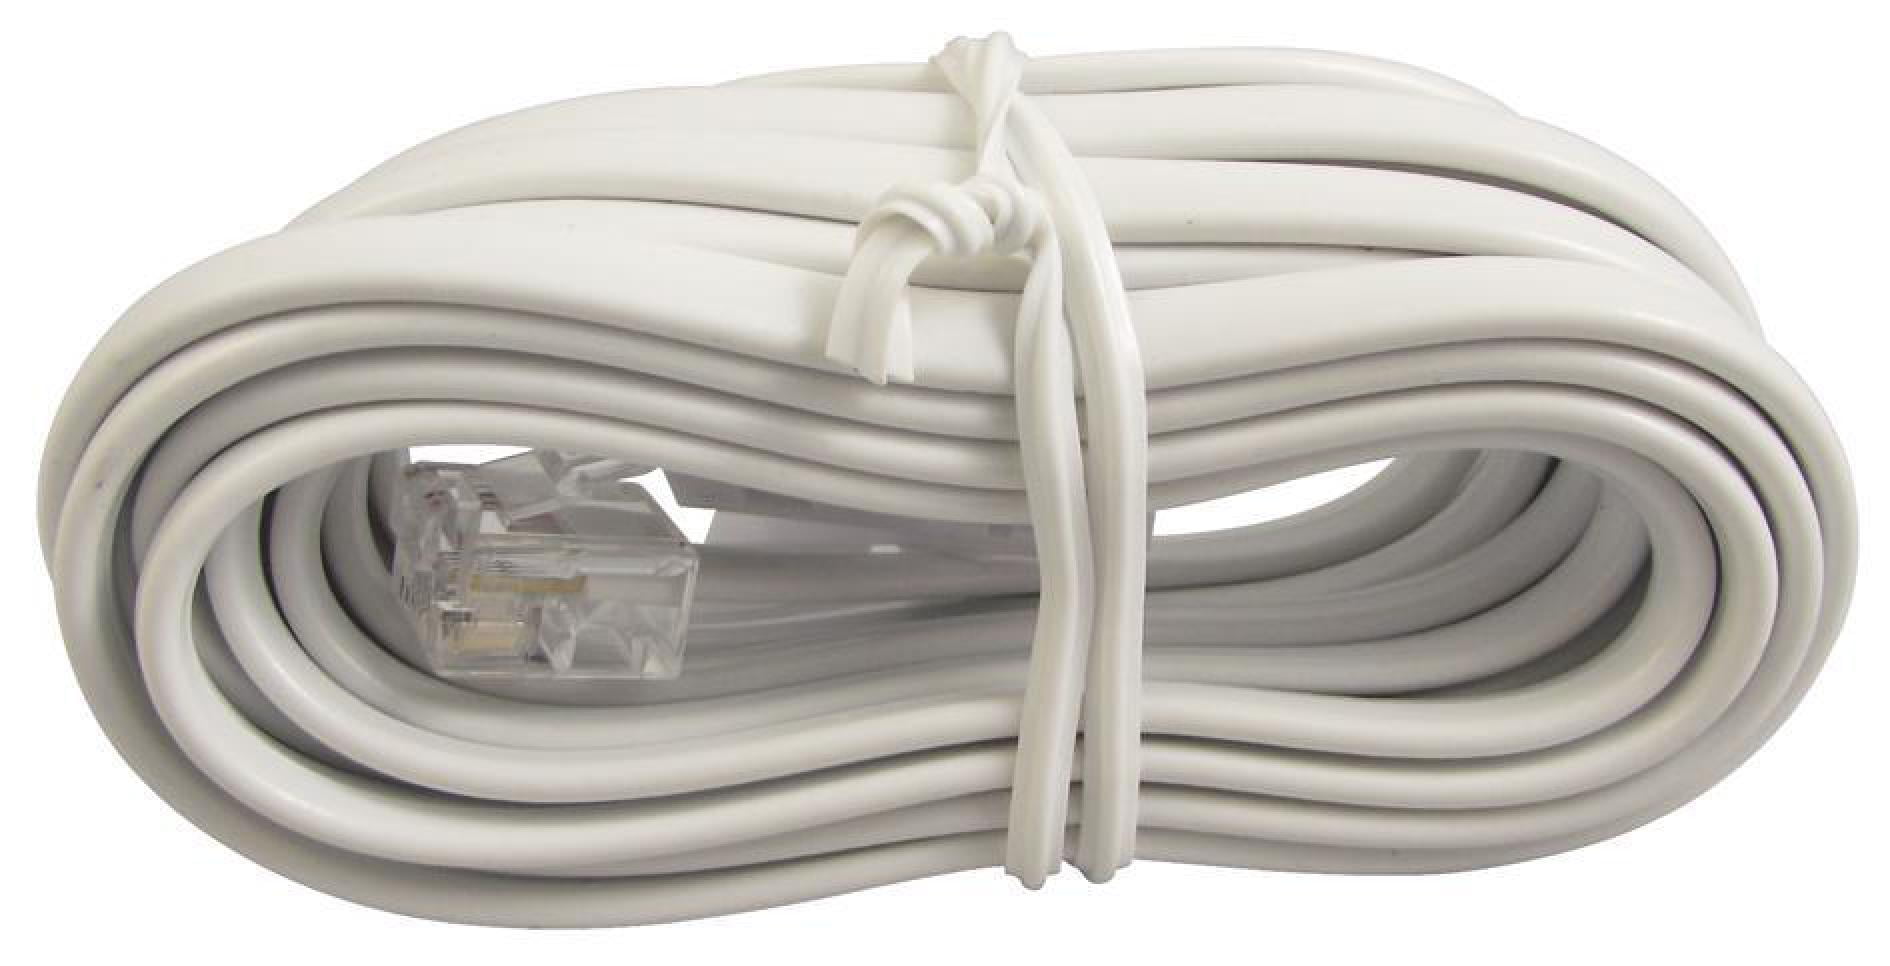 RS PRO, RS PRO Female RJ11 to Male BT431A Telephone Extension Cable, White  Sheath, 3m, 303-1271